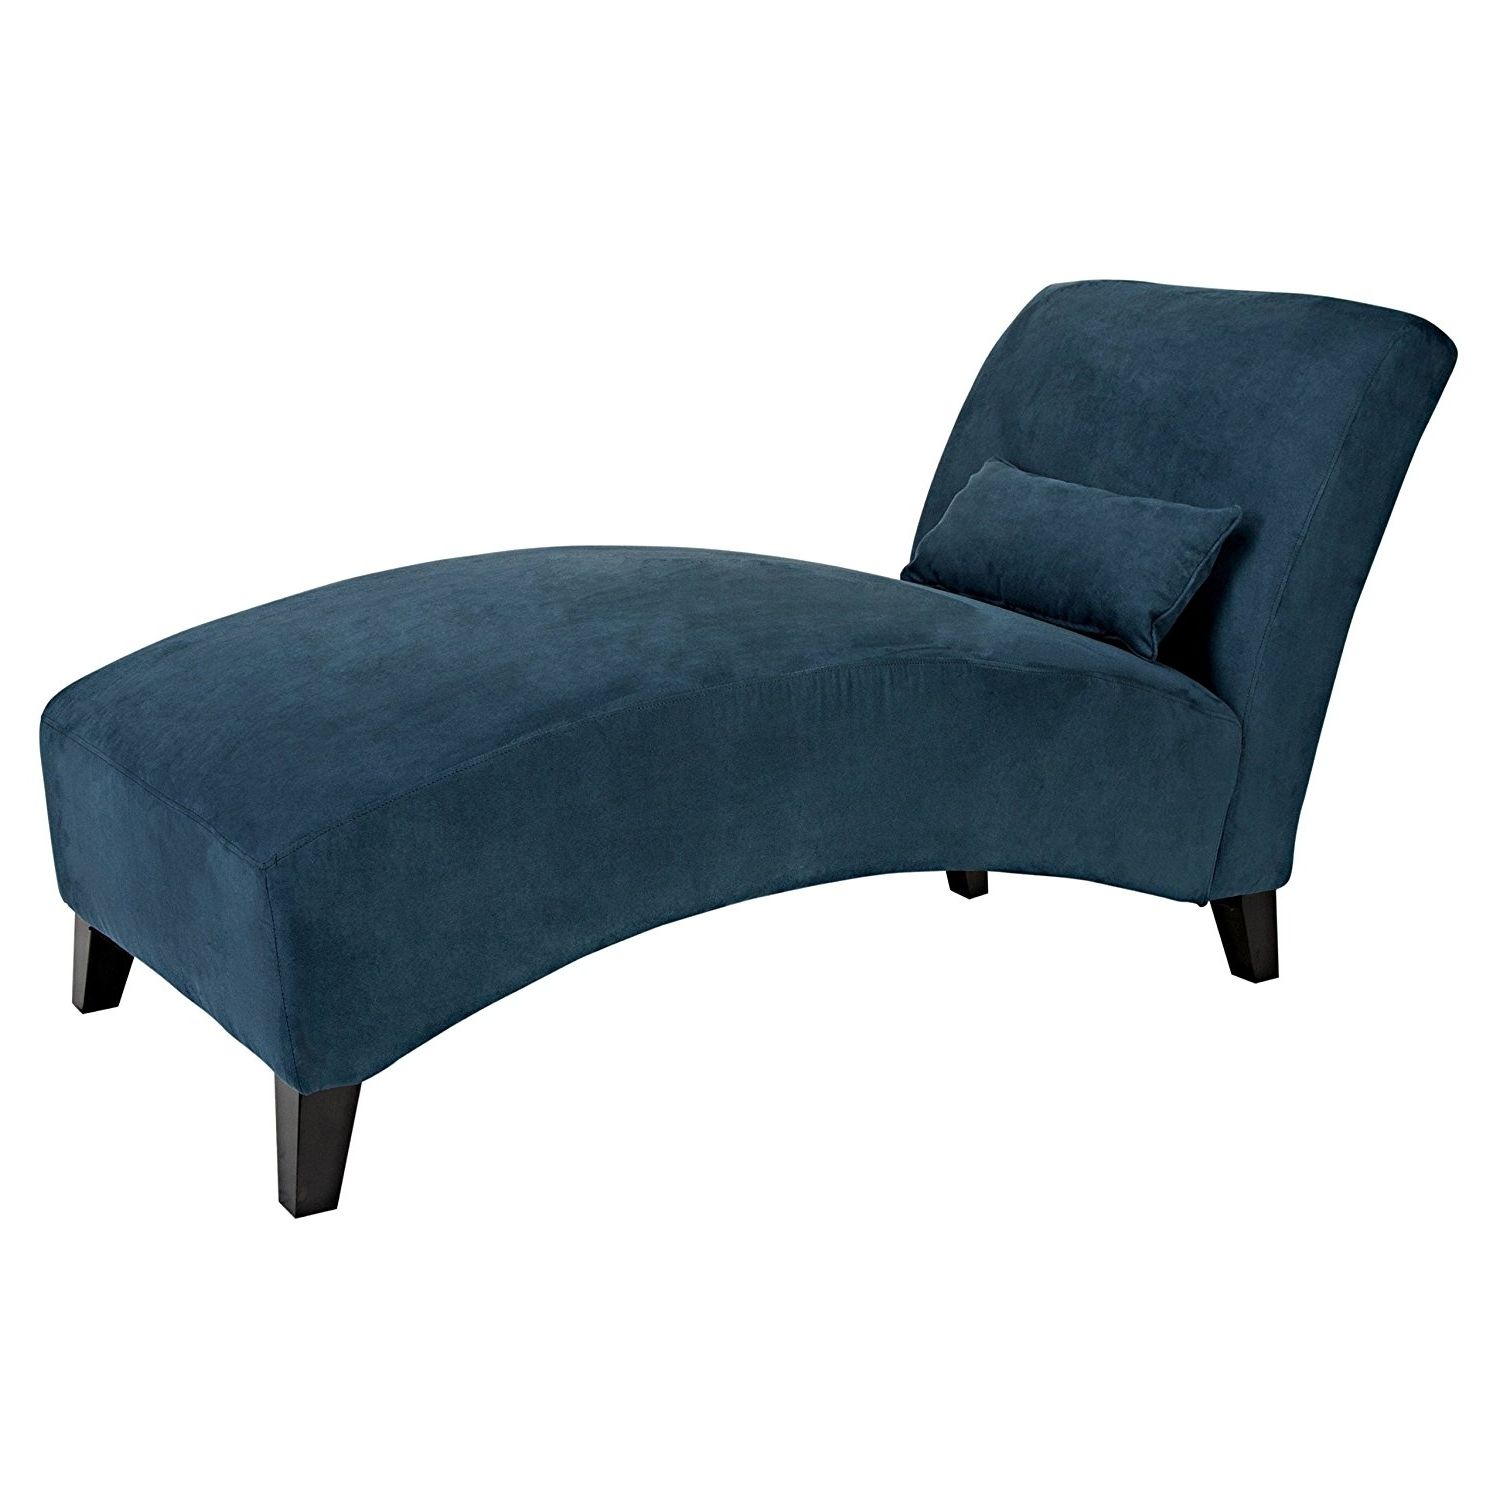 Amazon: Handy Living Cara Chaise In Dark Blue Microfiber With Regard To Trendy Blue Chaise Lounges (View 8 of 15)